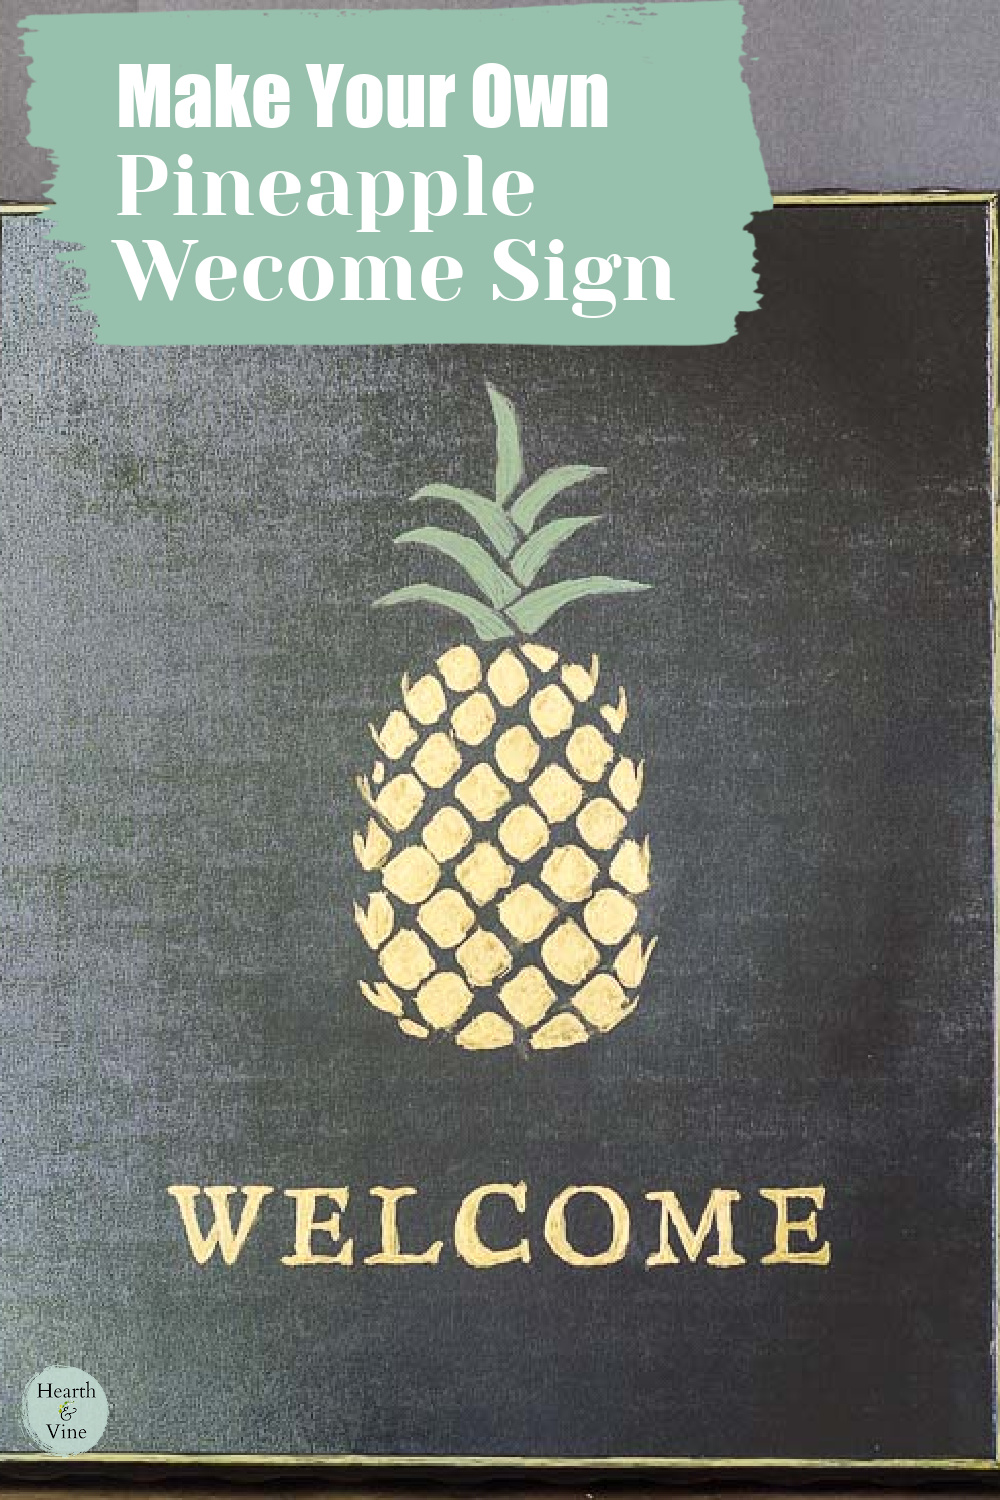 Painting with a large gold pineapple and the word welcome at the bottom.